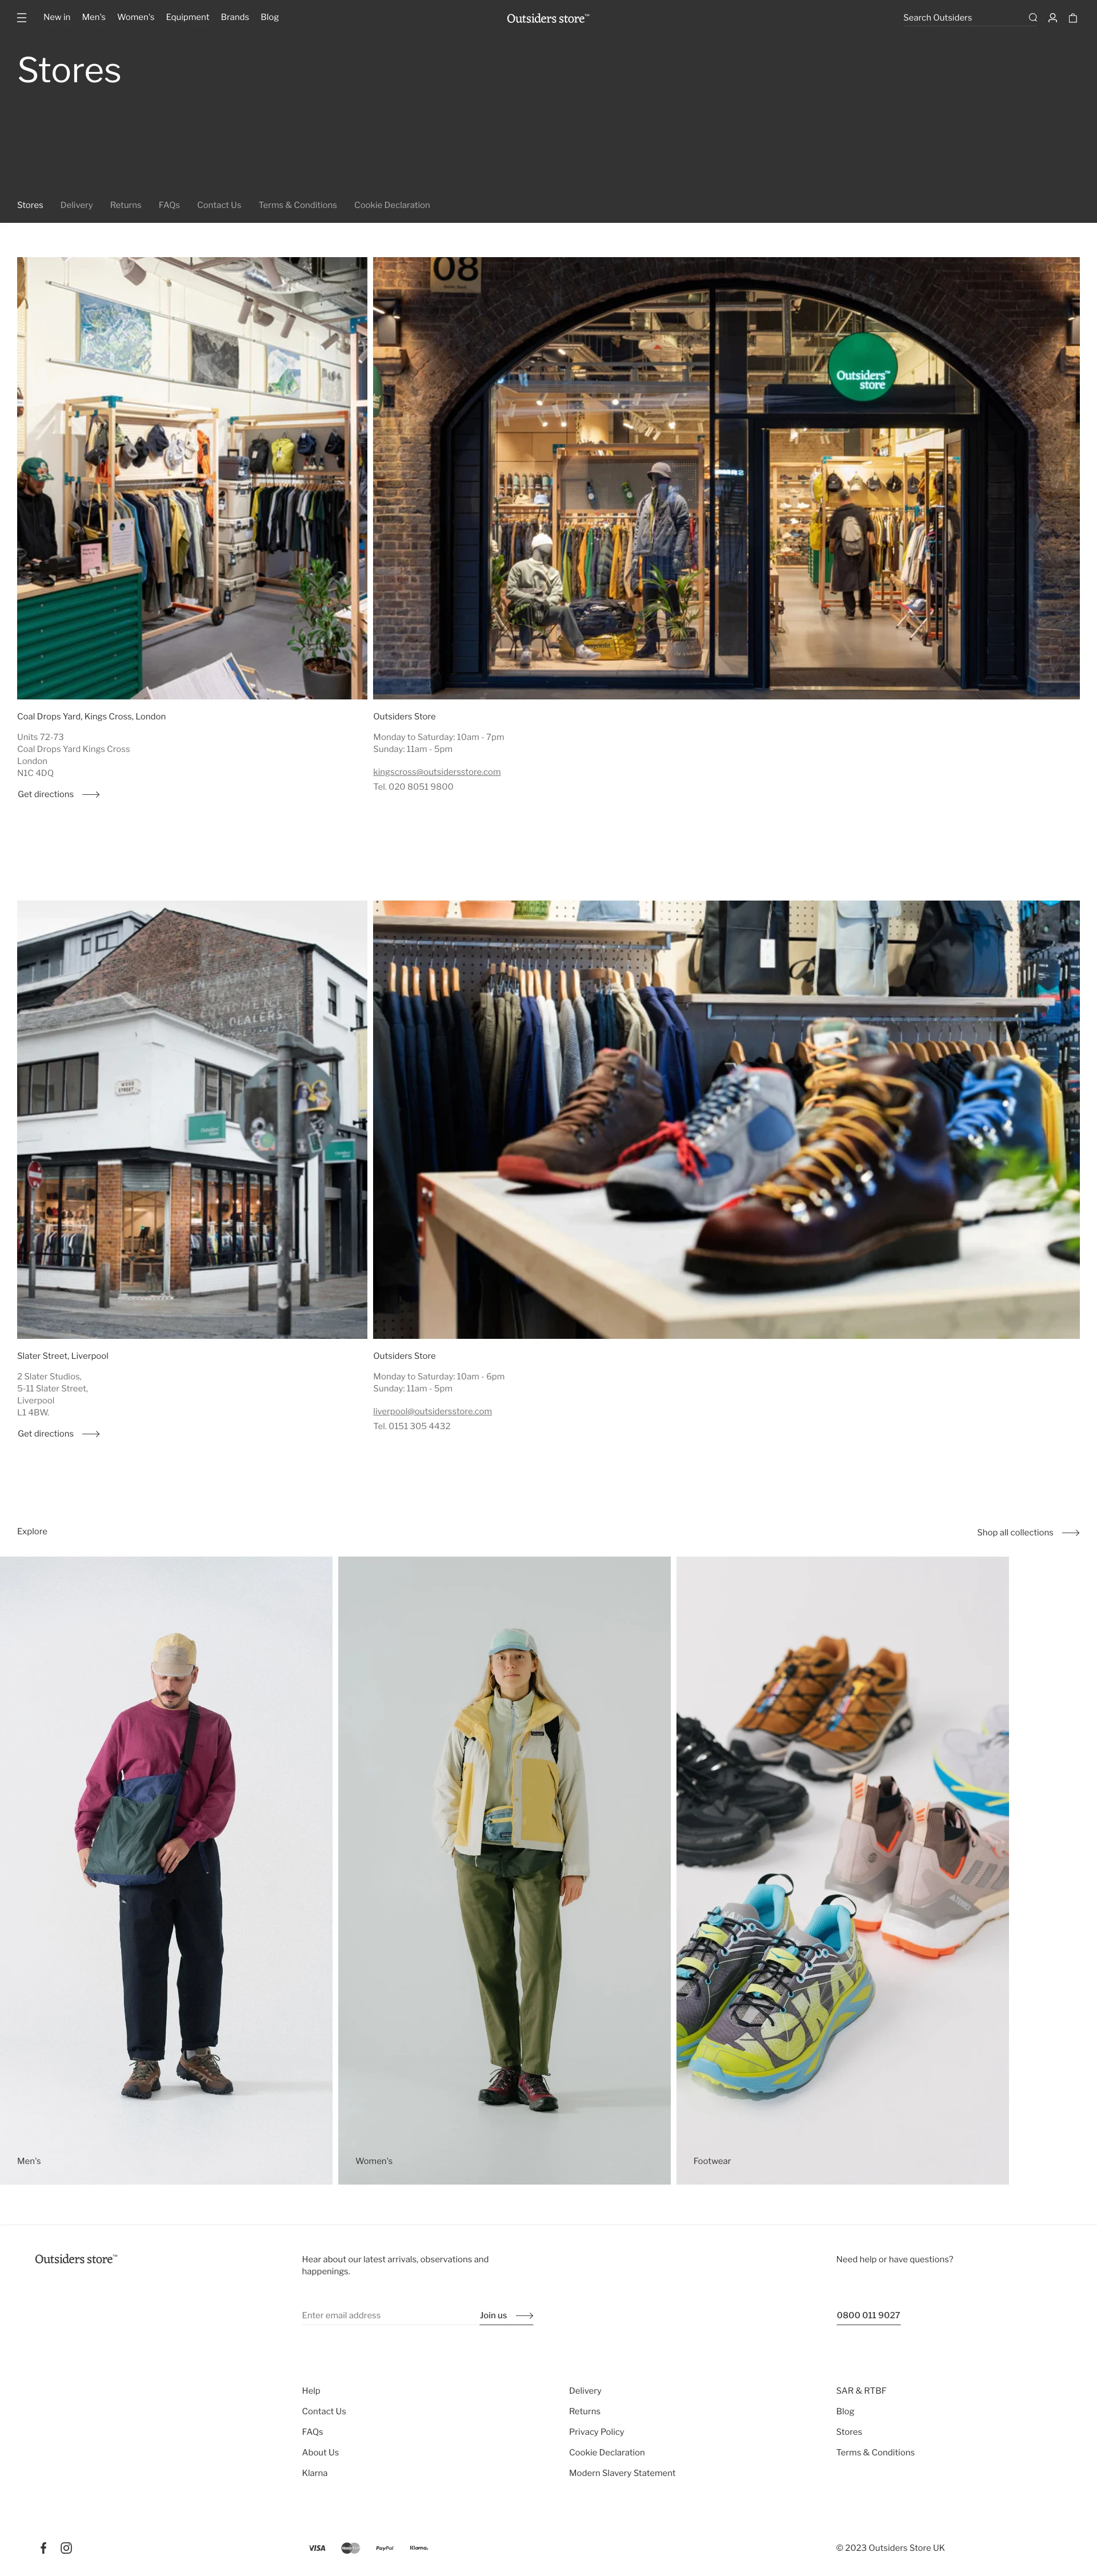 Outsiders Store Landing Page Example: Explore the latest functional clothing, footwear and equipment for both men & women.